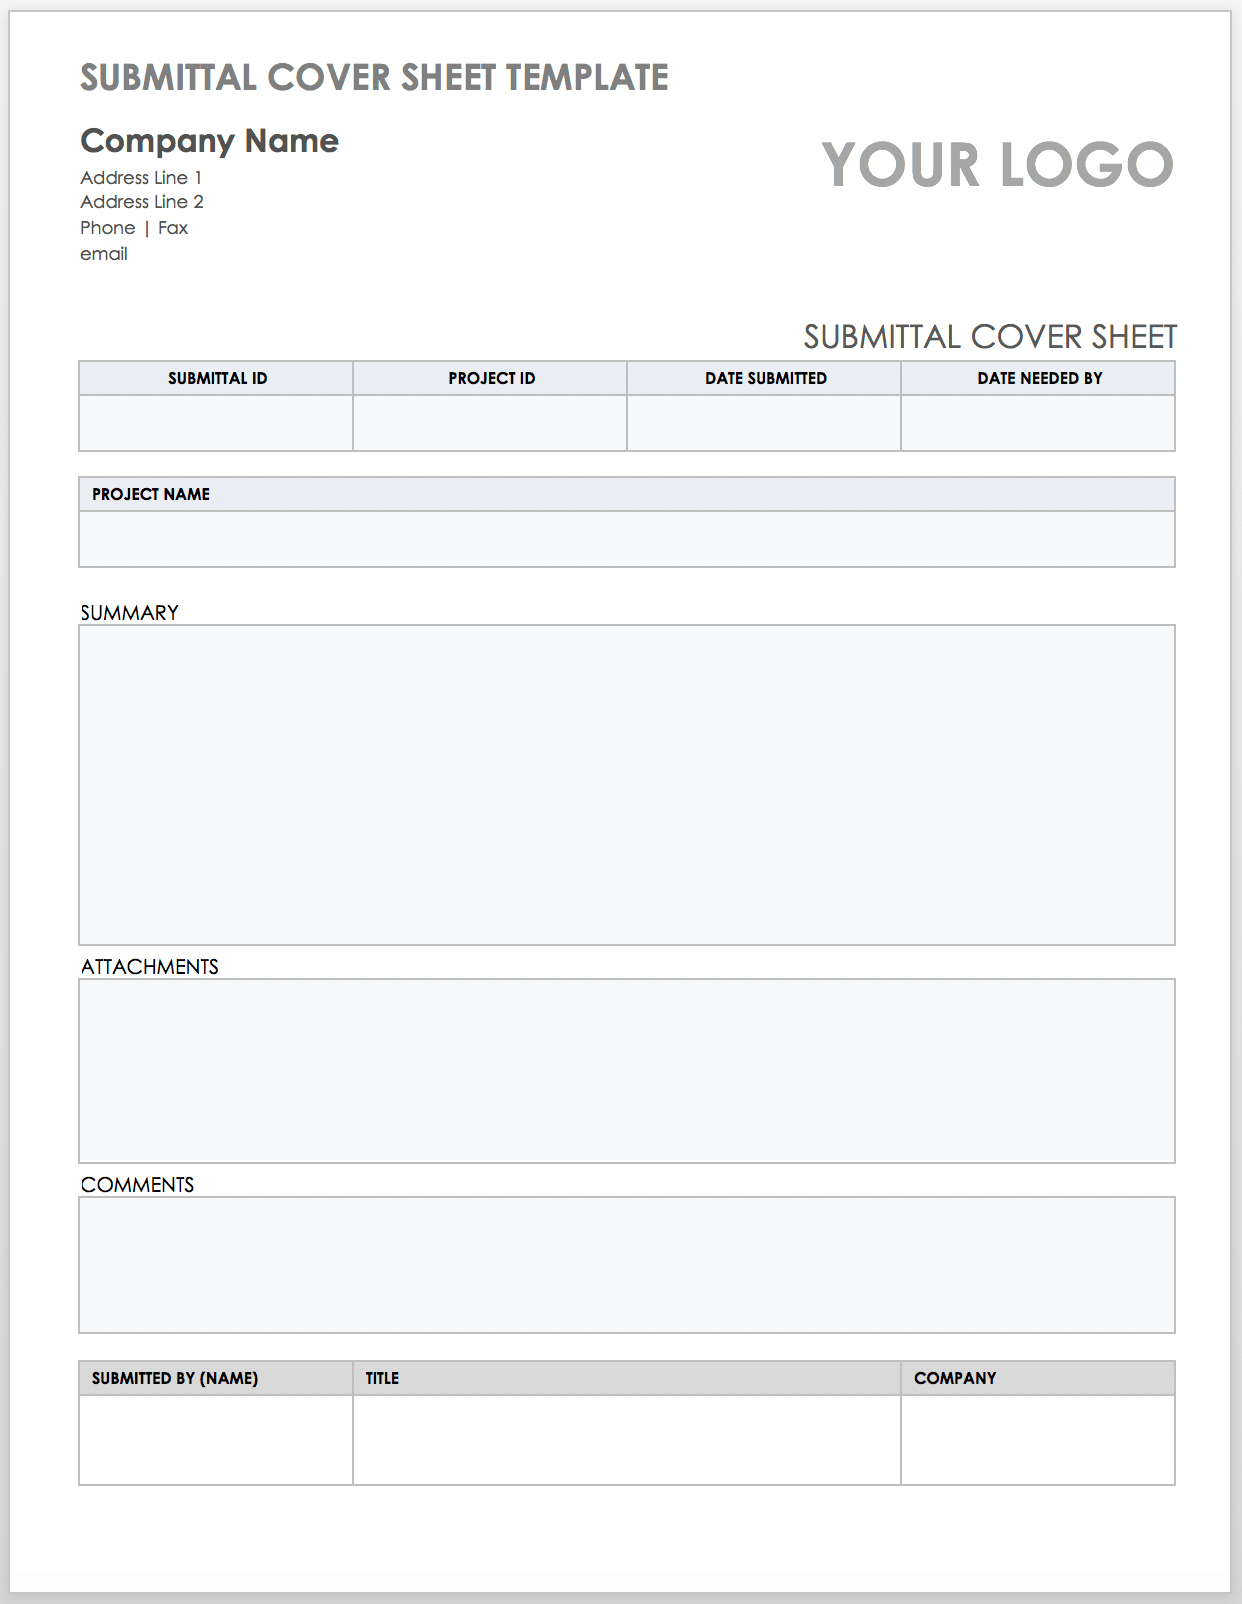 Free Construction Submittal Form Template - Templates Printable Download